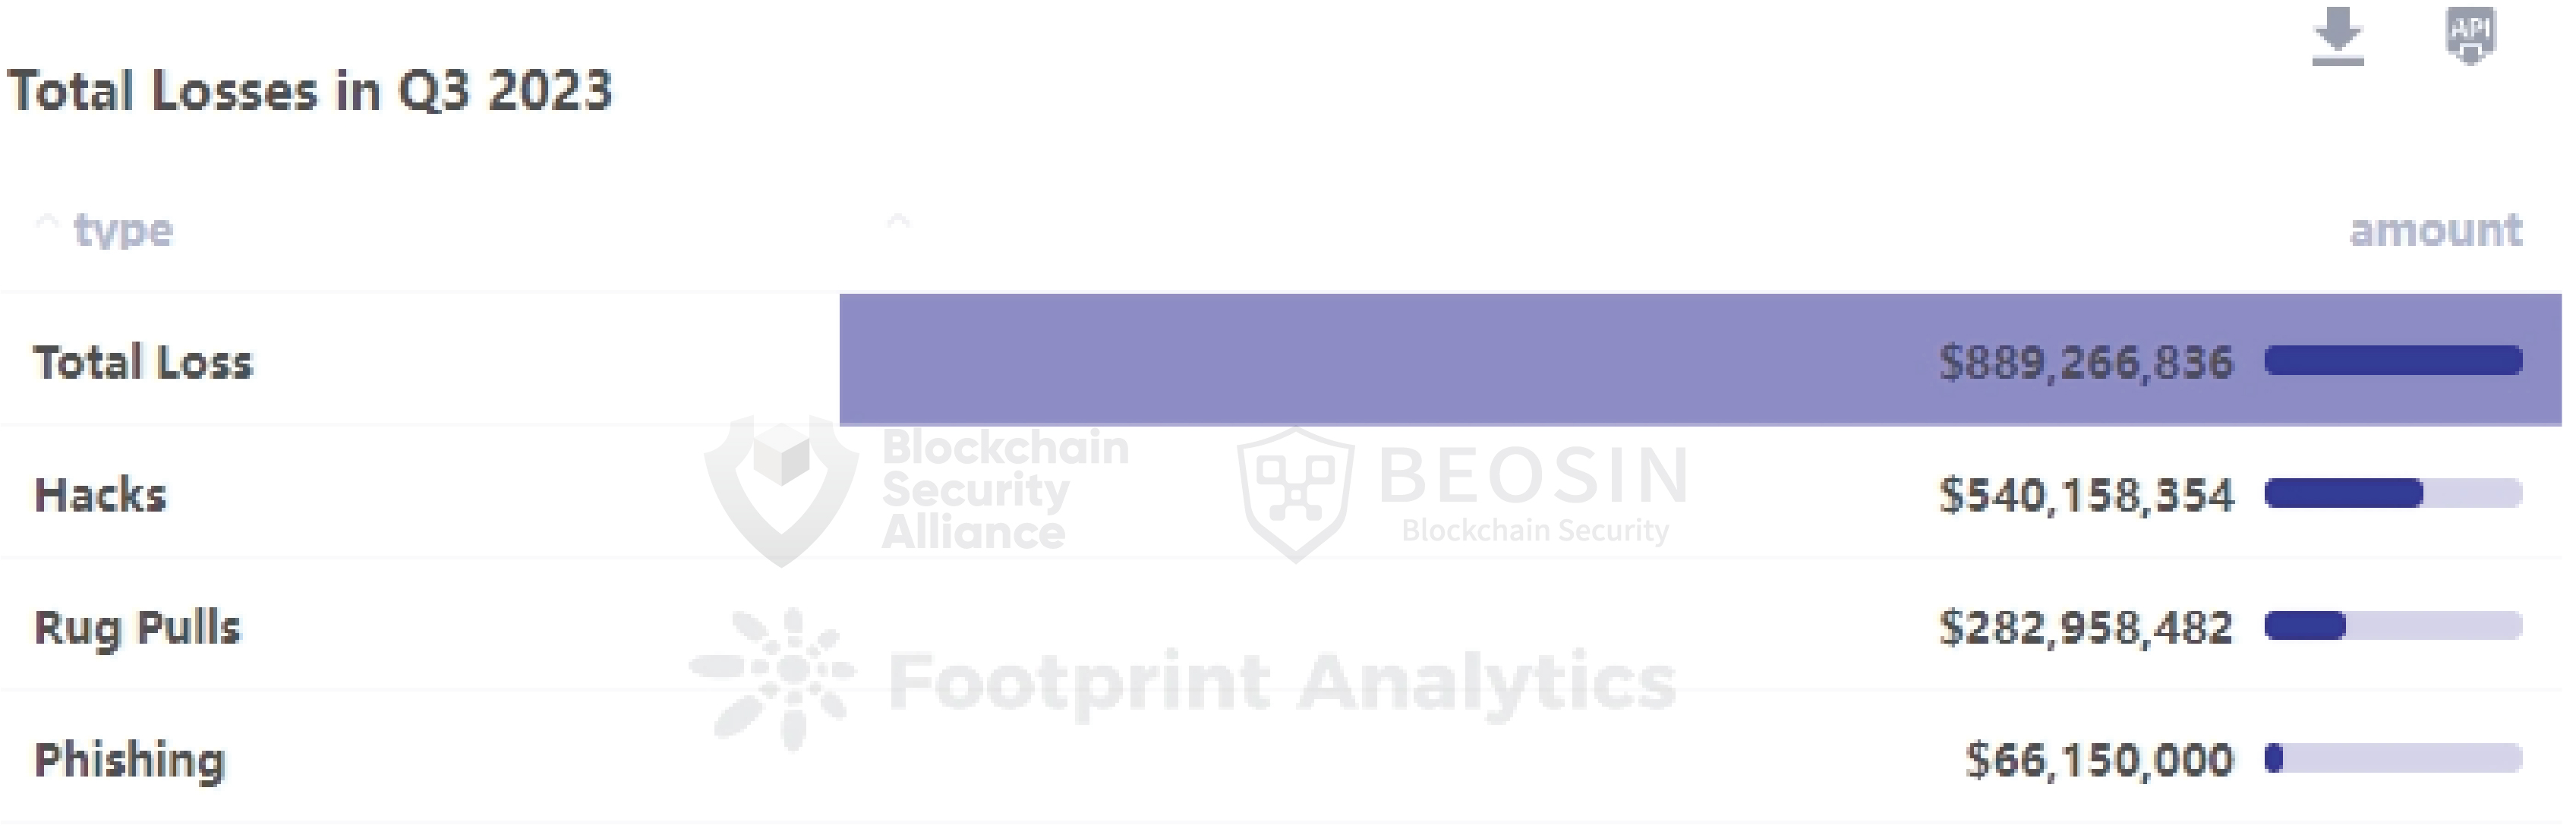 Web3 Lost Over $890 Million to Hacks and Scams in Q3 2023: Boesin